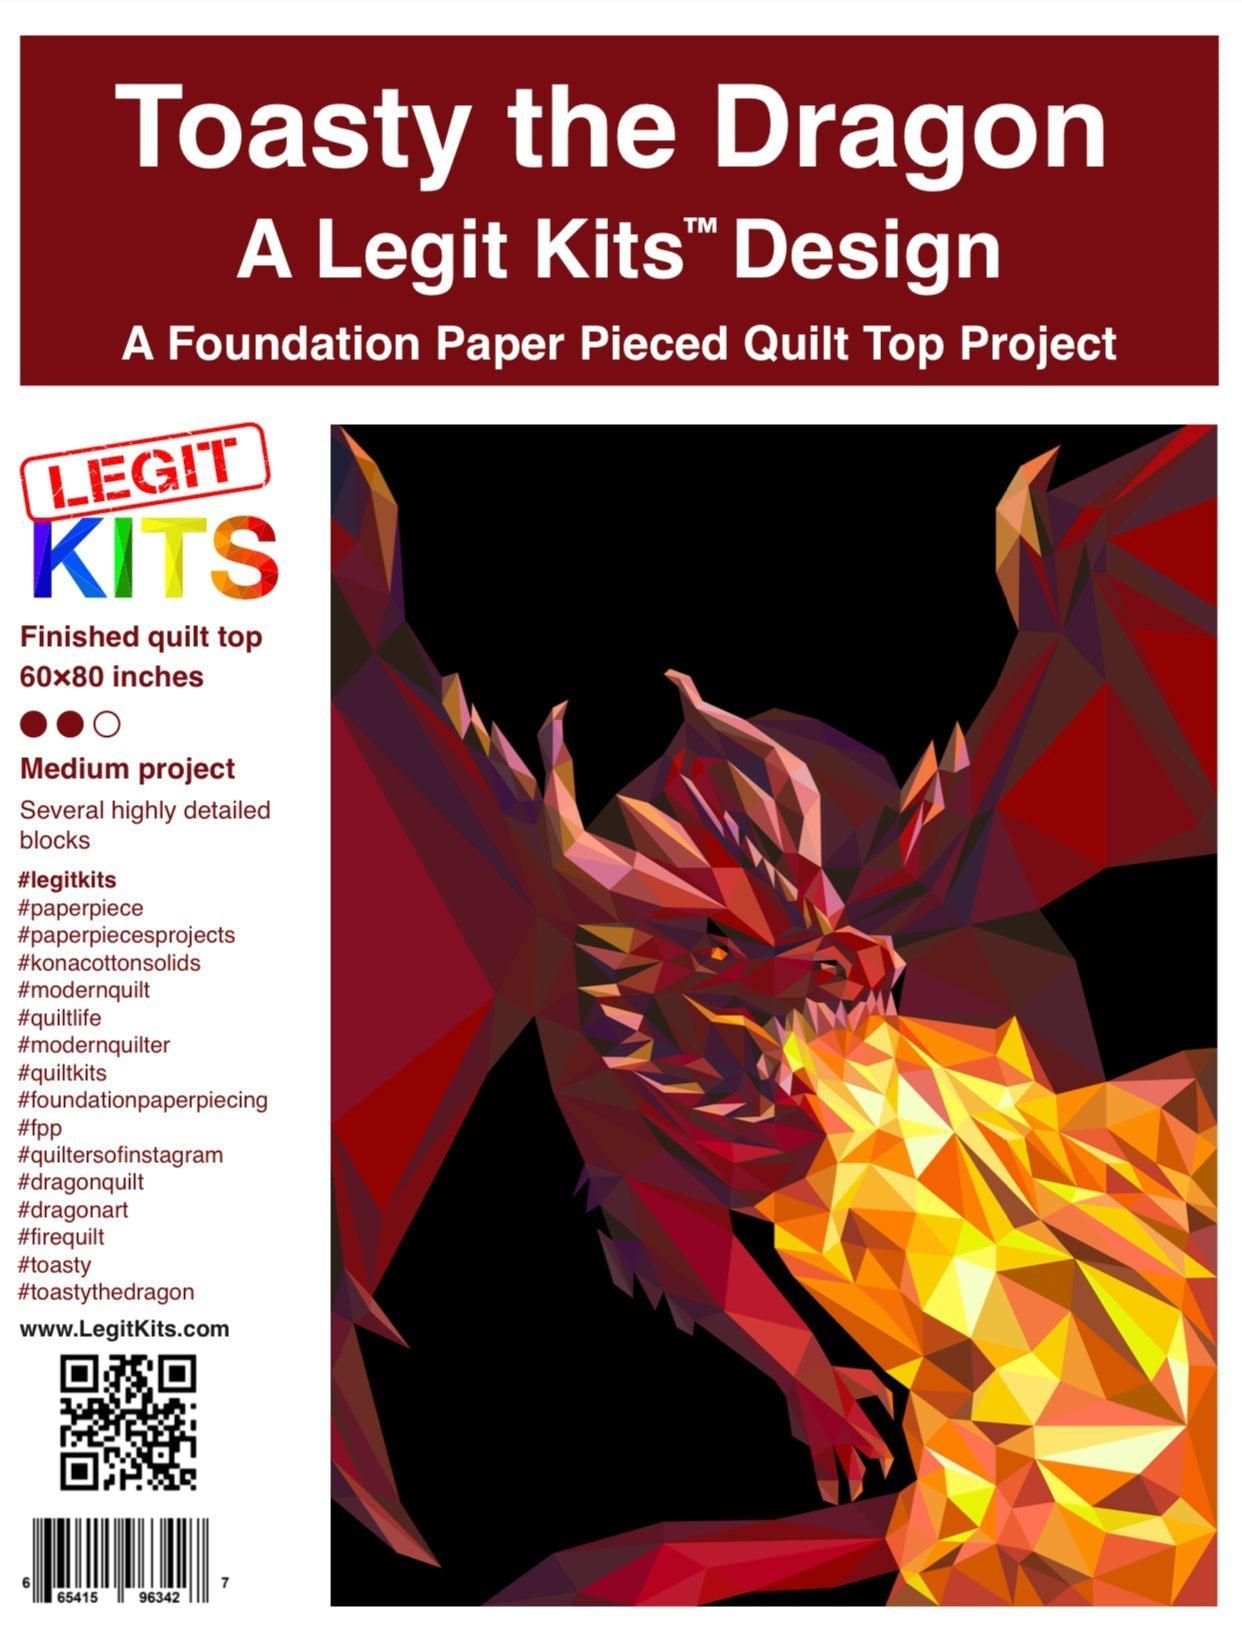 Toasty the Dragon Pattern-Legit Kits-My Favorite Quilt Store